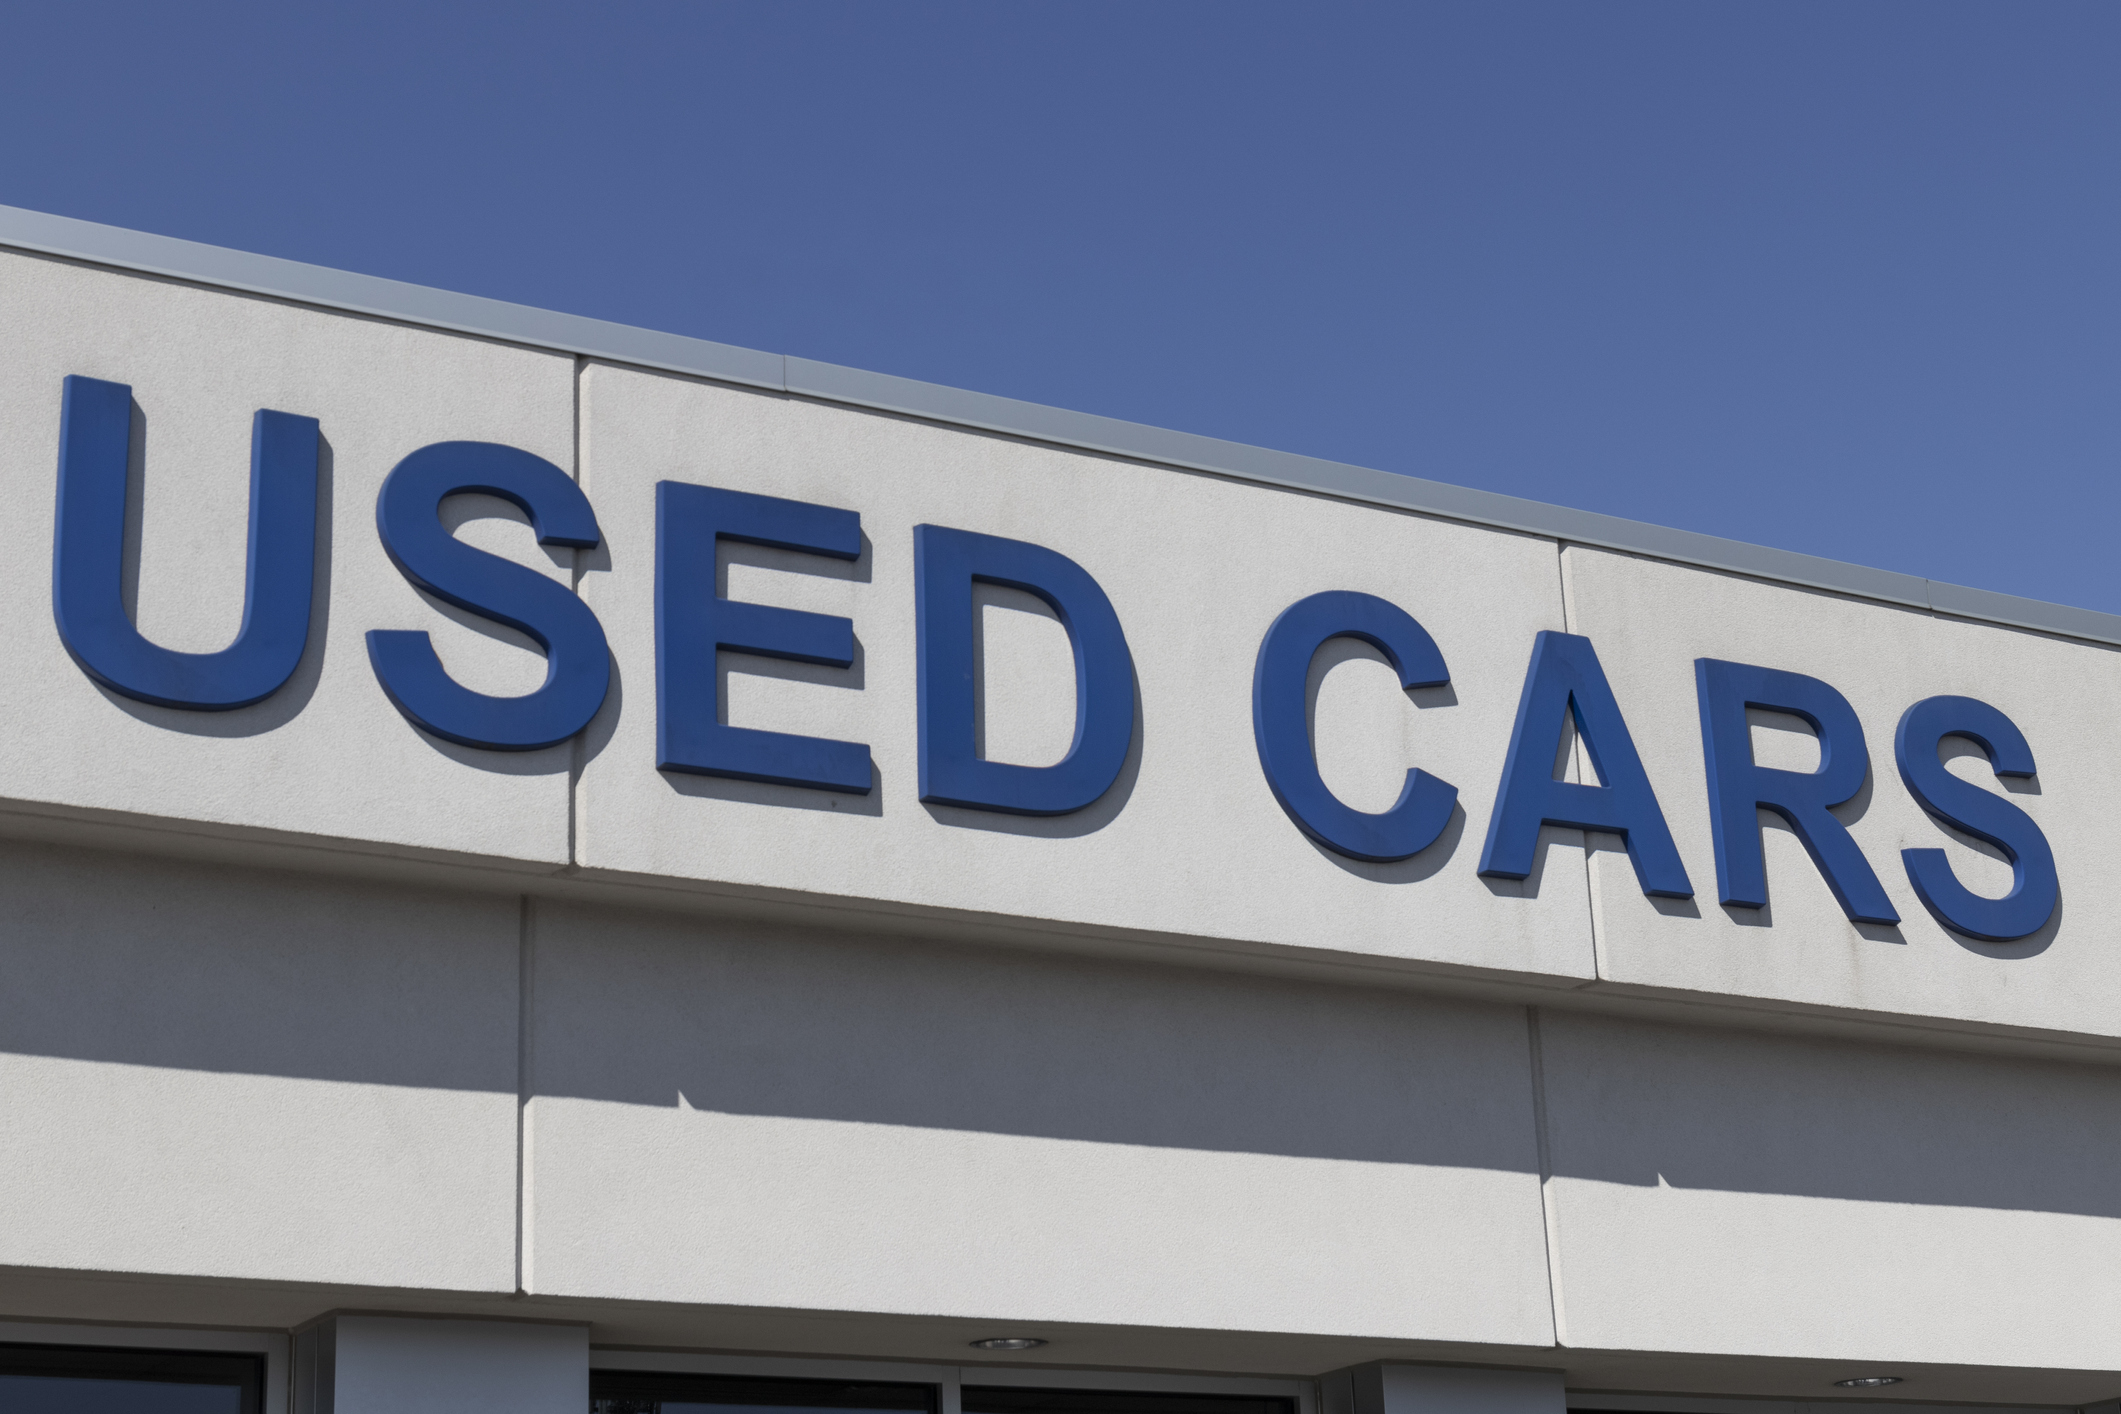 Sign with text &quot;USED CARS&quot; on the facade of a building against a clear sky